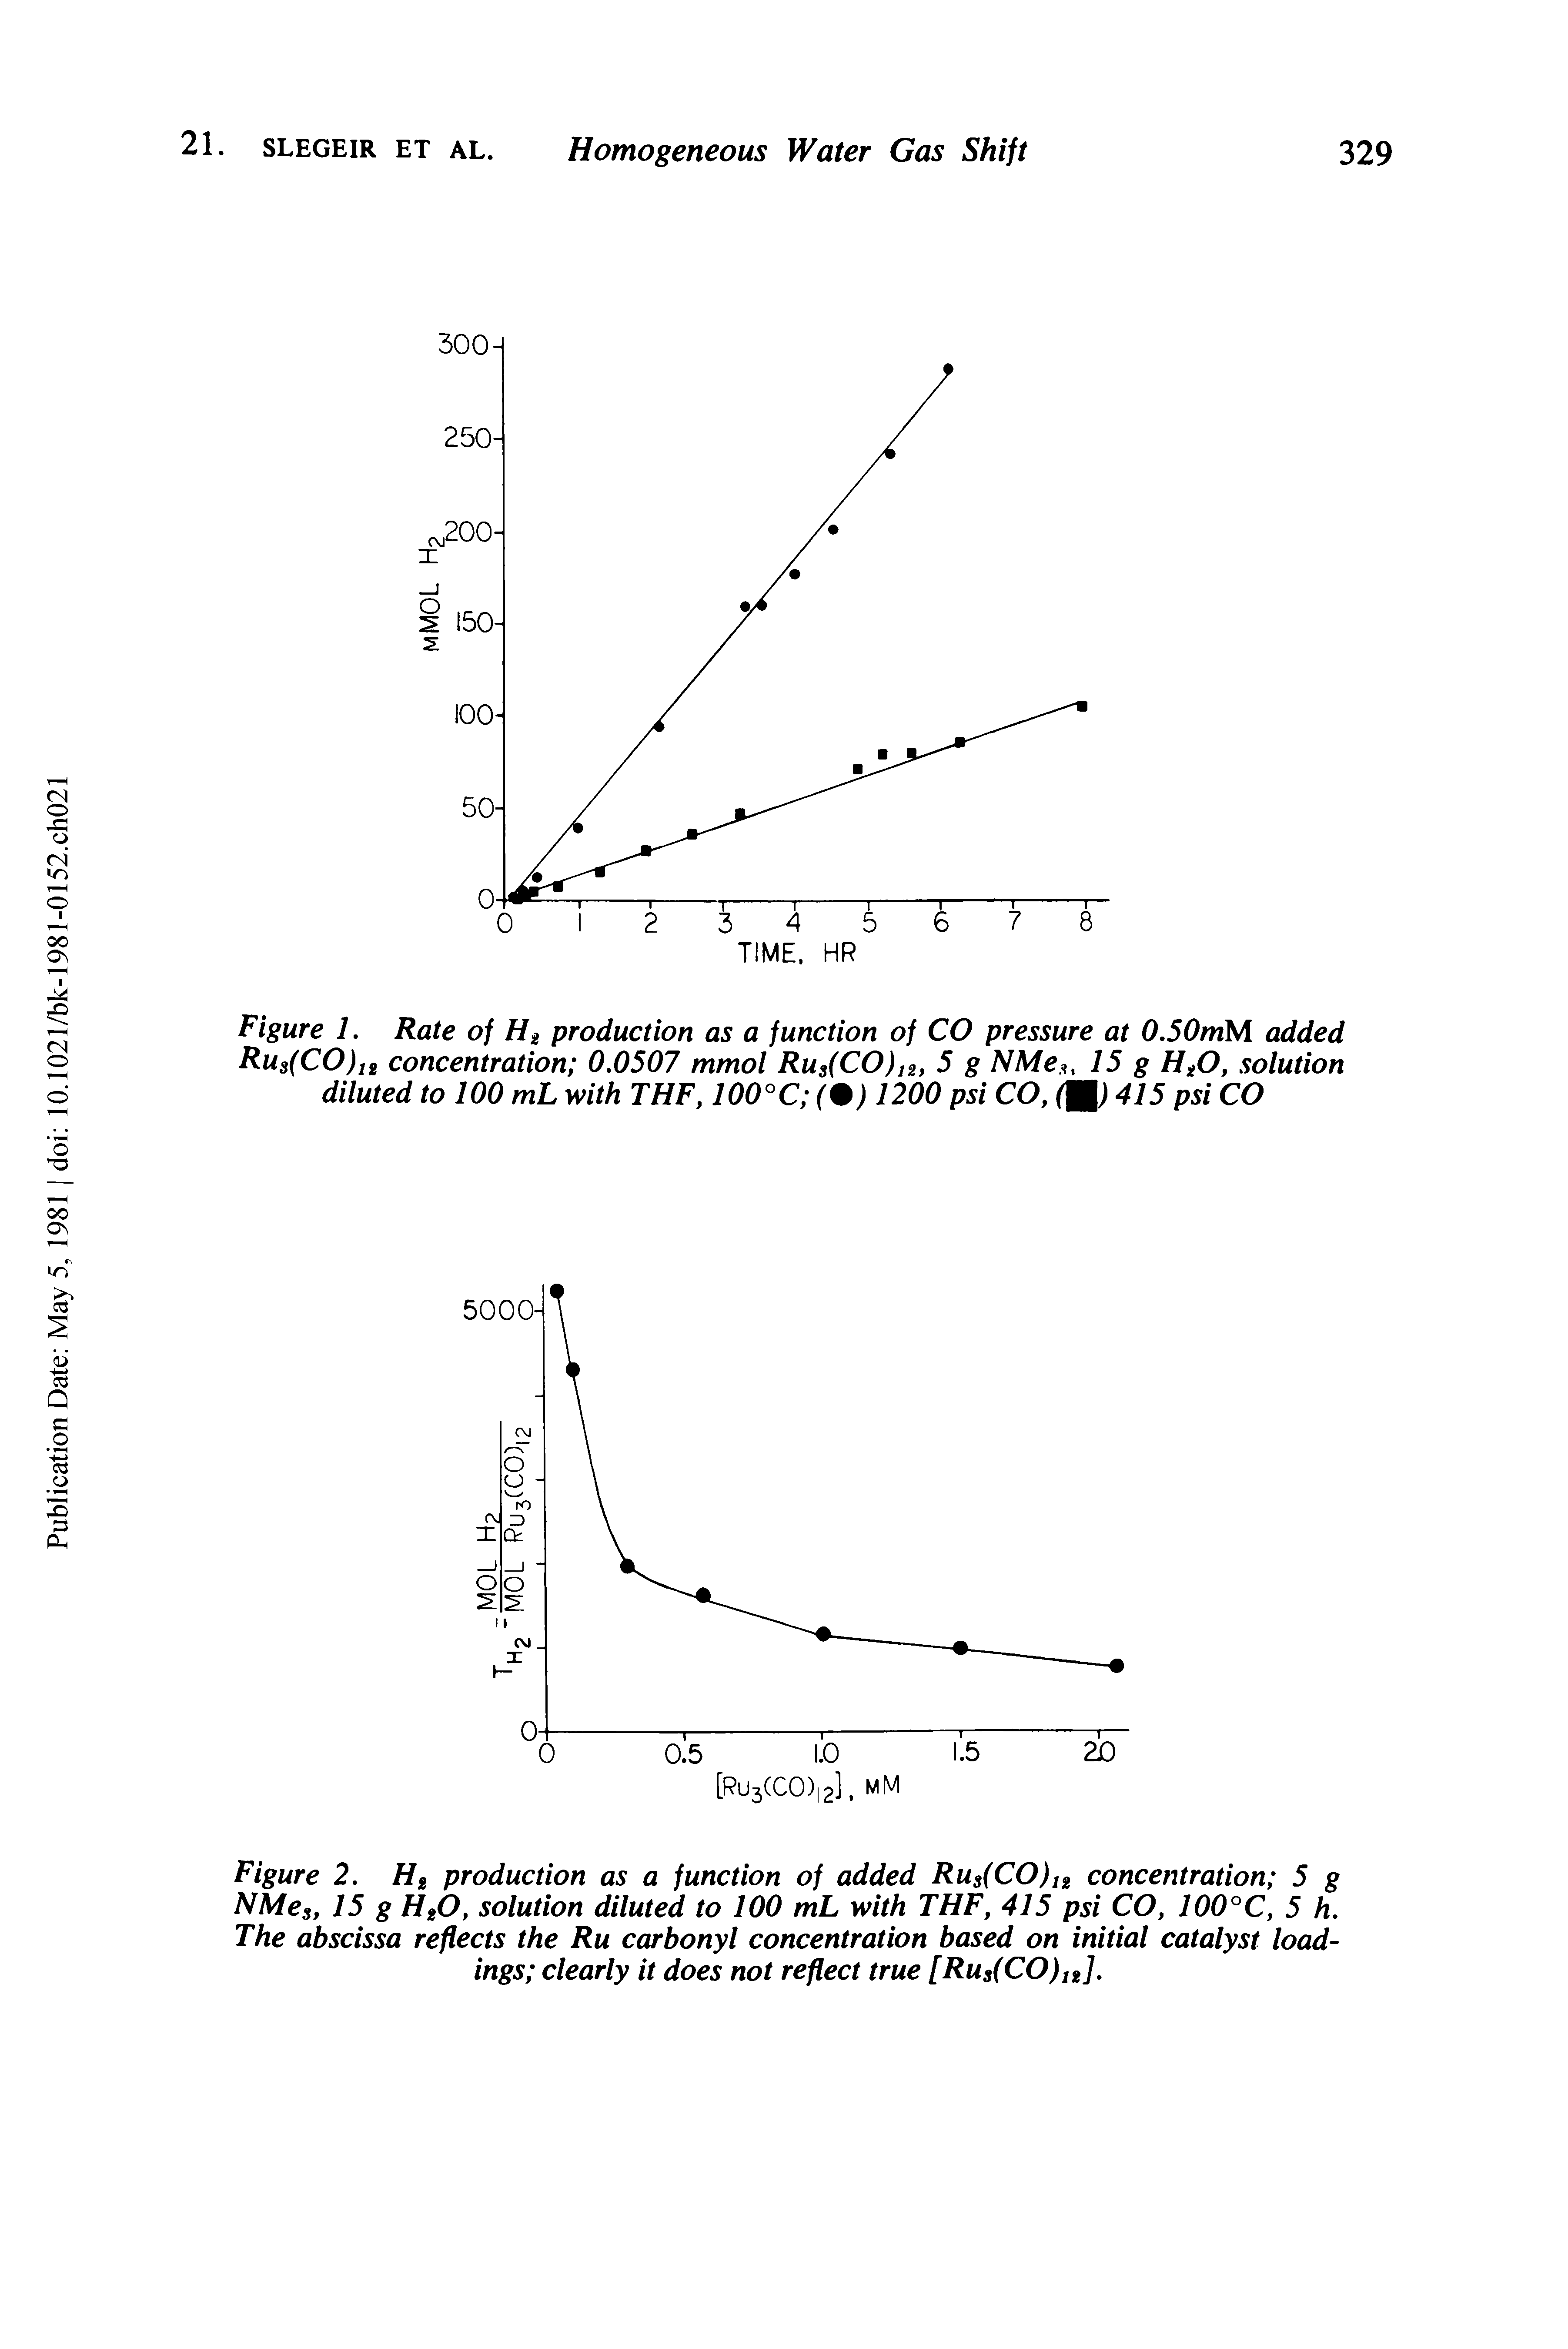 Figure 2. Hg production as a function of added Rus(CO)lg concentration 5 g NMes, 15 g HgO, solution diluted to 100 mL with THF, 415 psi CO, 100°C, 5 h. The abscissa reflects the Ru carbonyl concentration based on initial catalyst loadings clearly it does not reflect true [Rus(CO)lg].